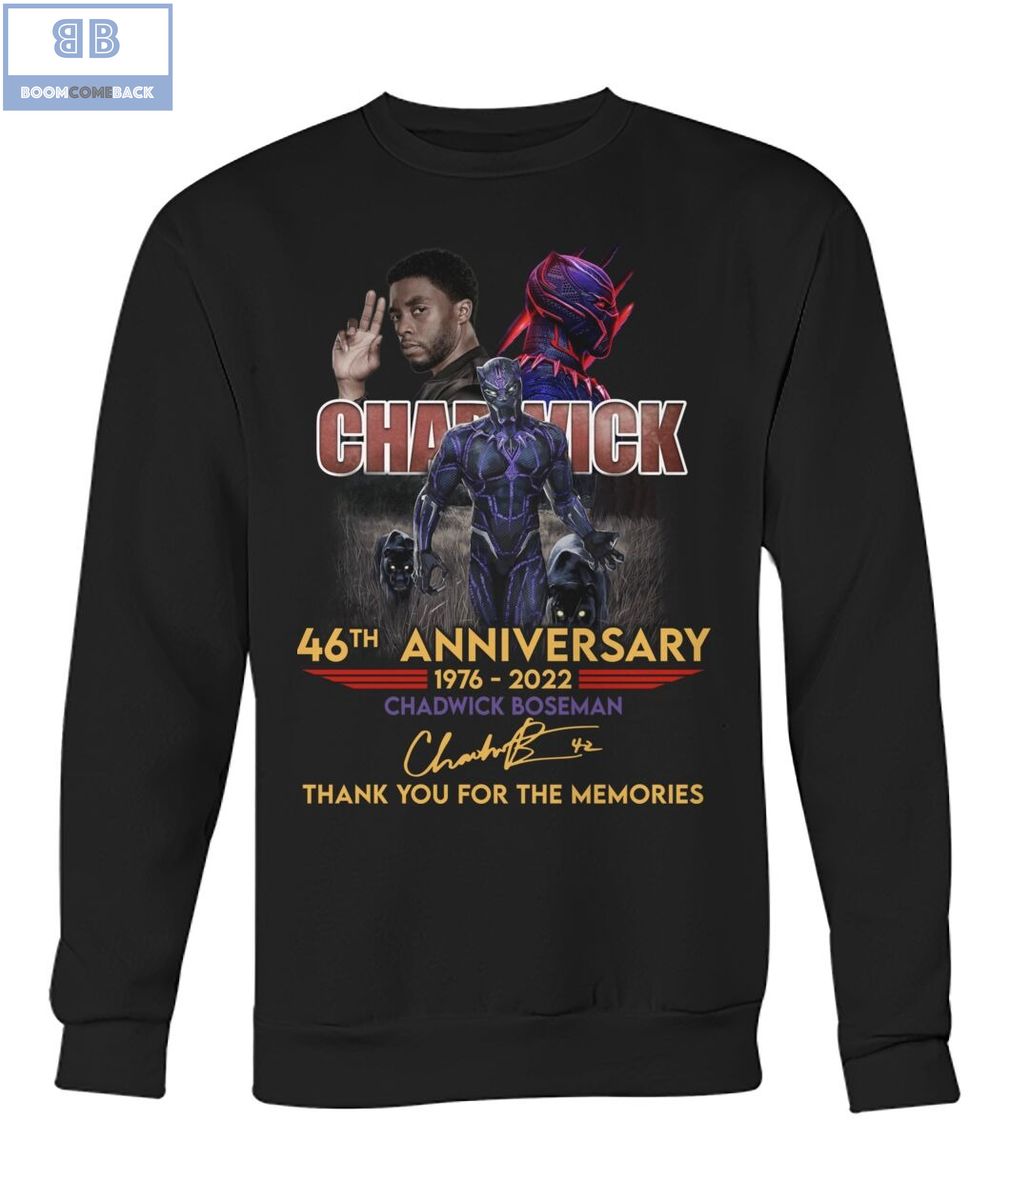 Black Panther 46th Anniversary 1976 2022 Thank You For The Memories Shirt